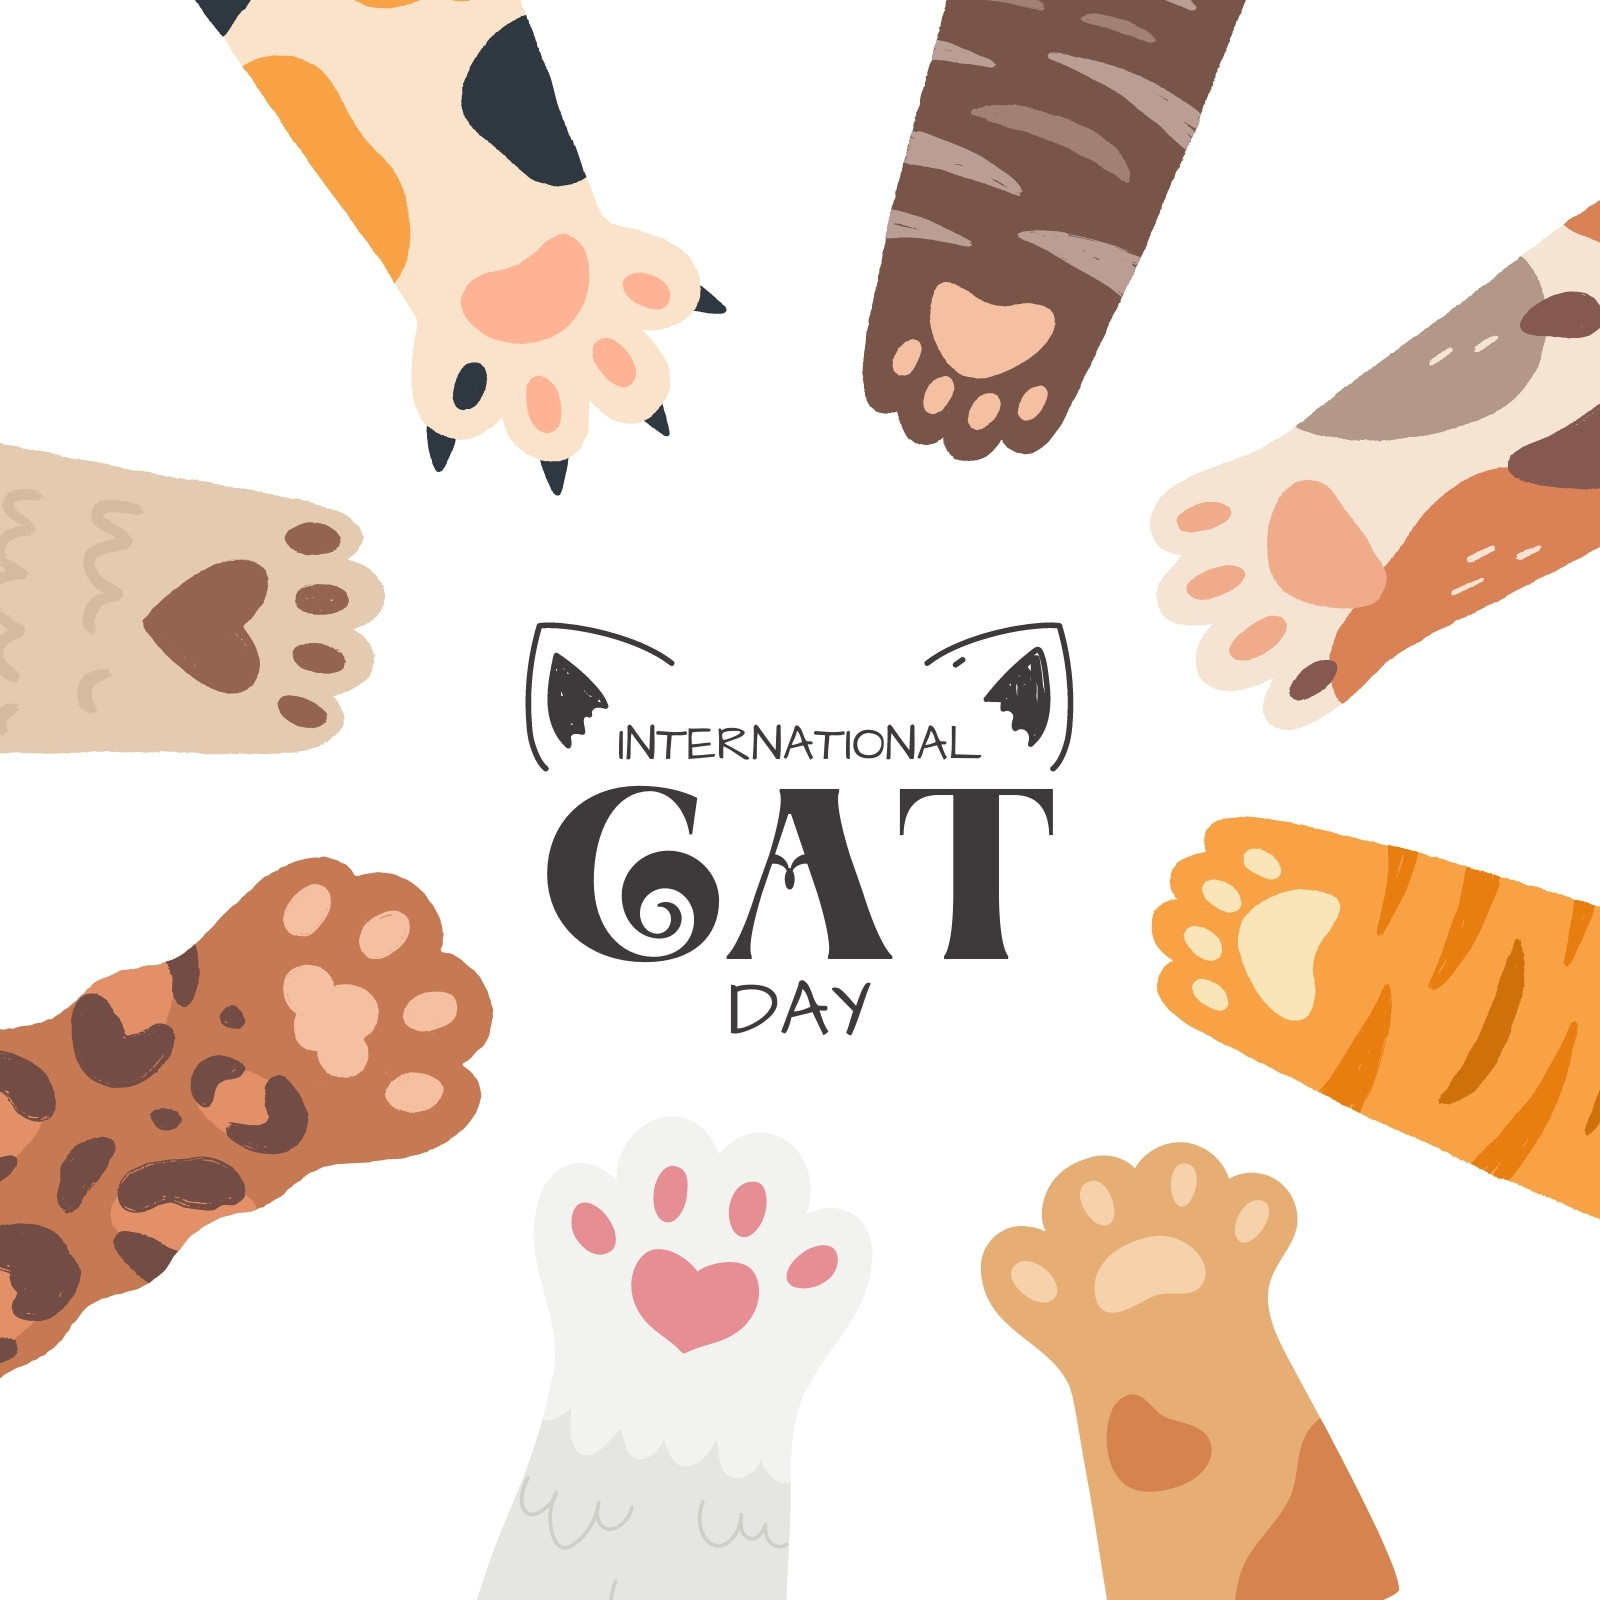 Google Marks International Cat Day With Adorable Paw Print Game - CNET